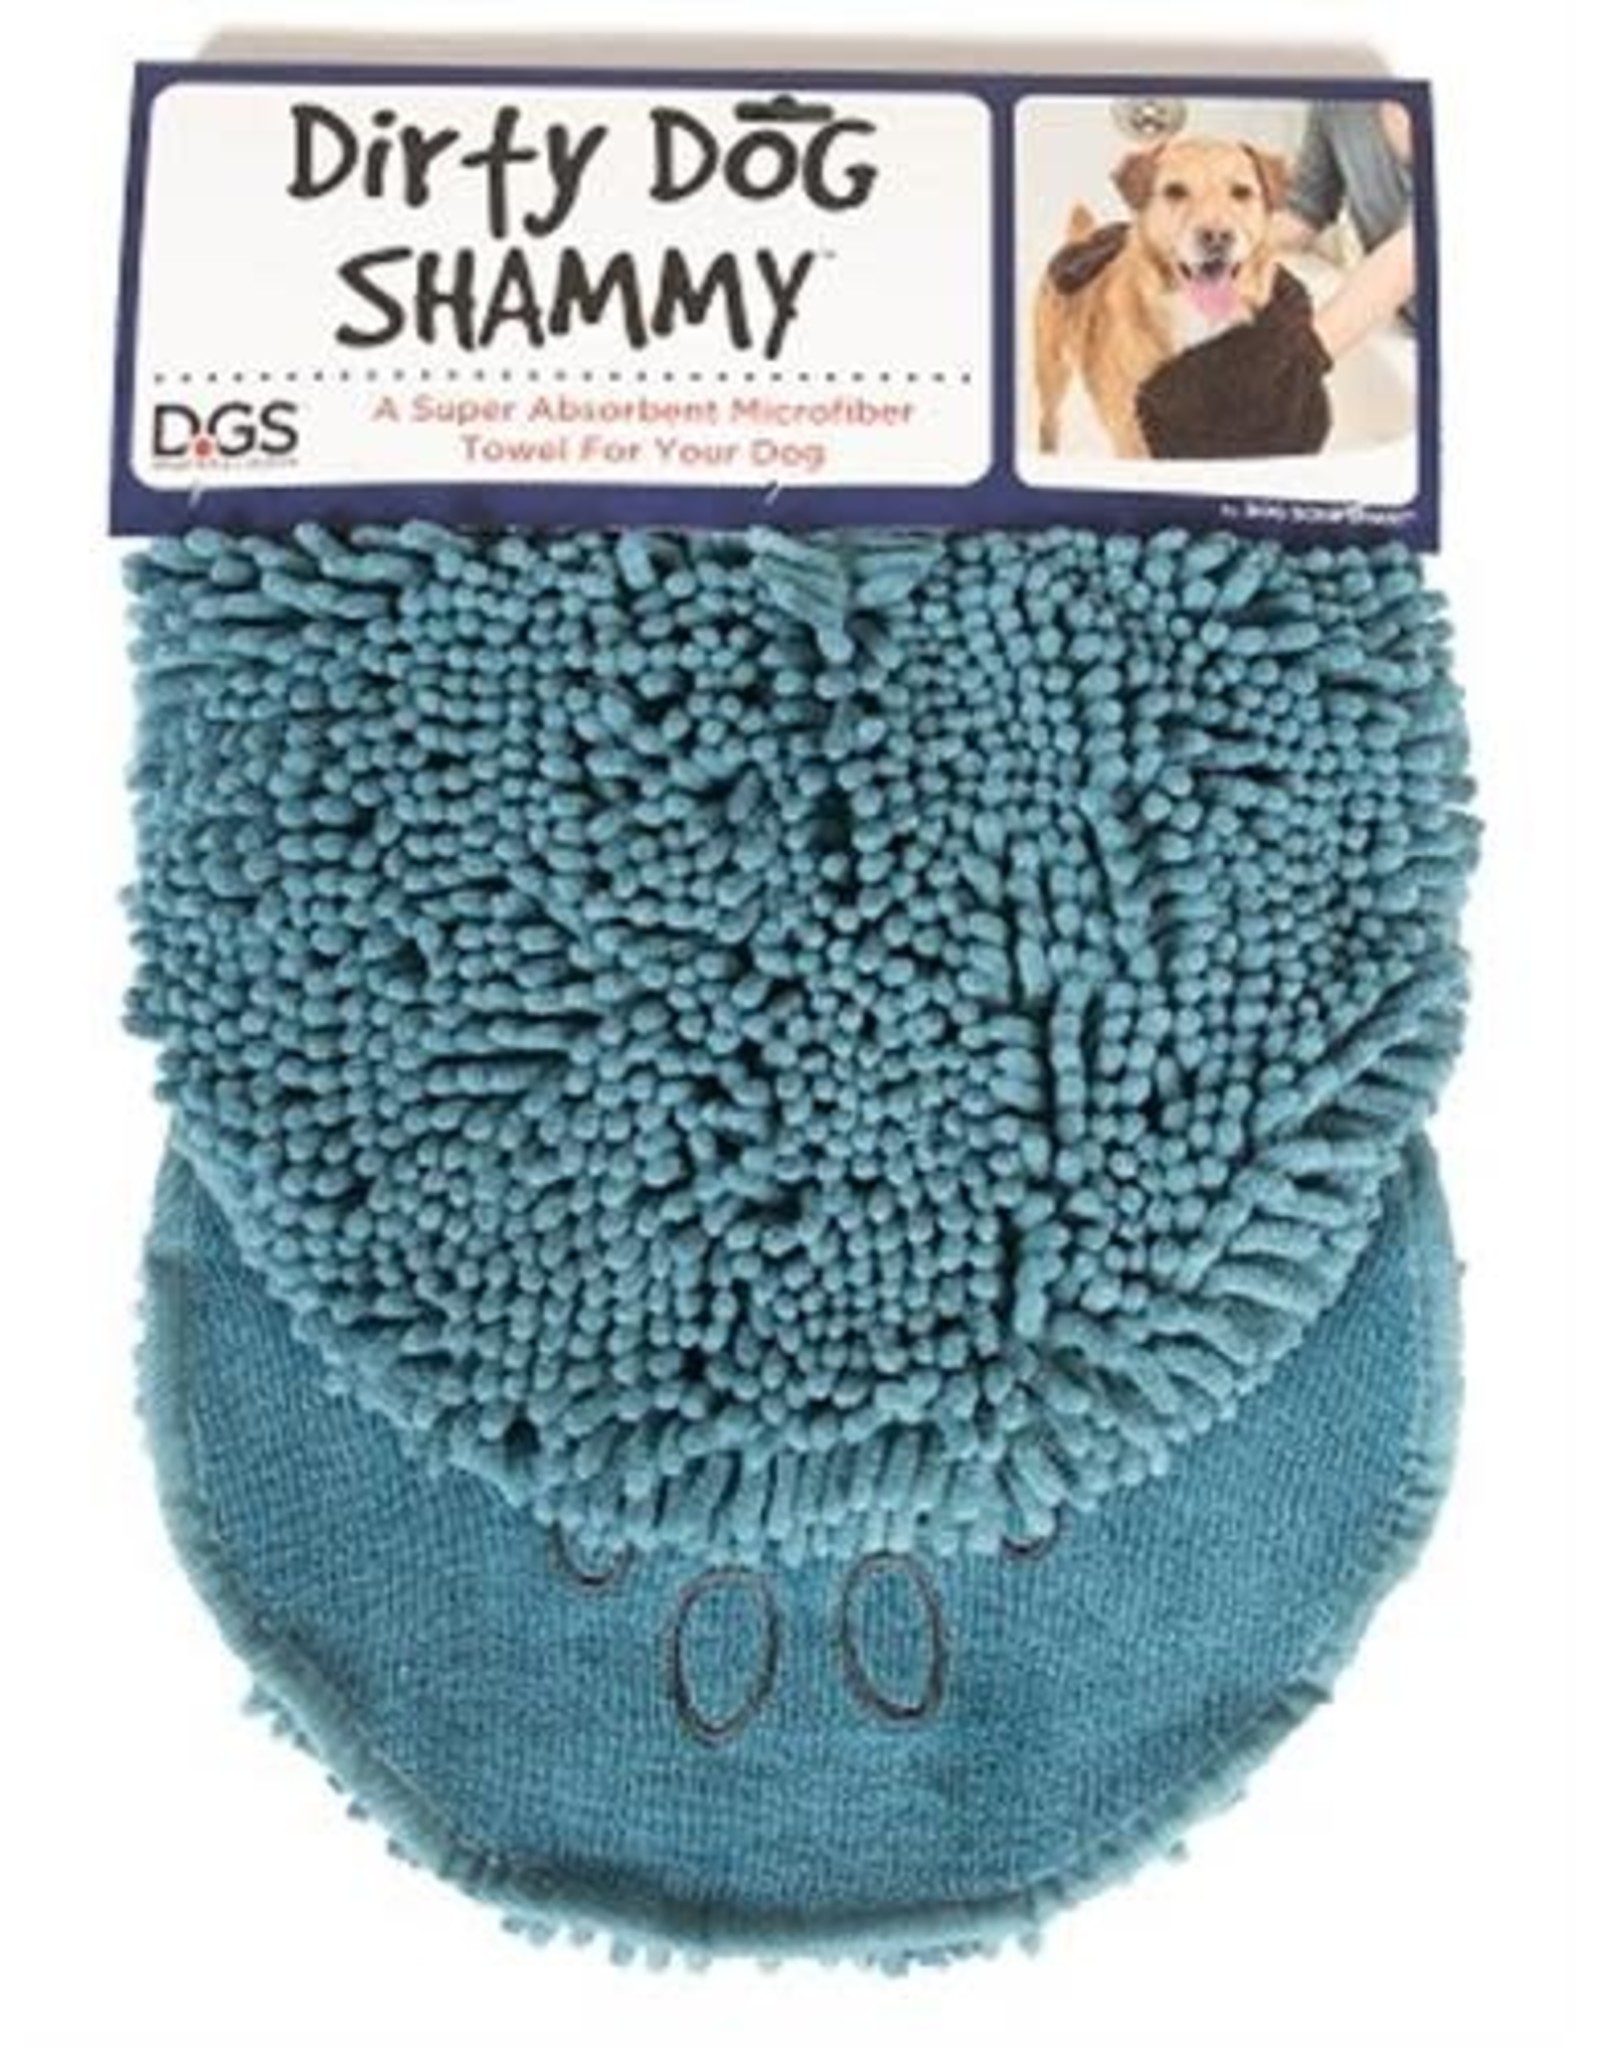 Dog Gone Smart Pet Products Dirty Dog Shammy Towel: Pacific Blue, os